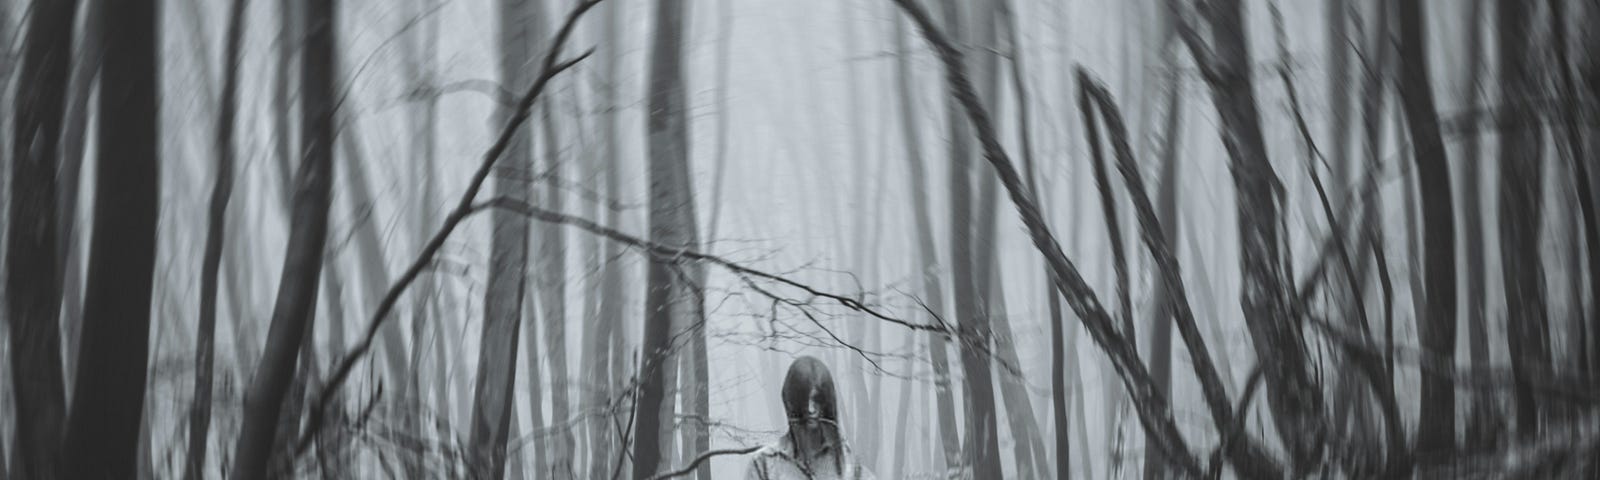 A nightmarish picture of a ghostly girl in a white dress, surrounded by a creepy barren woodland.